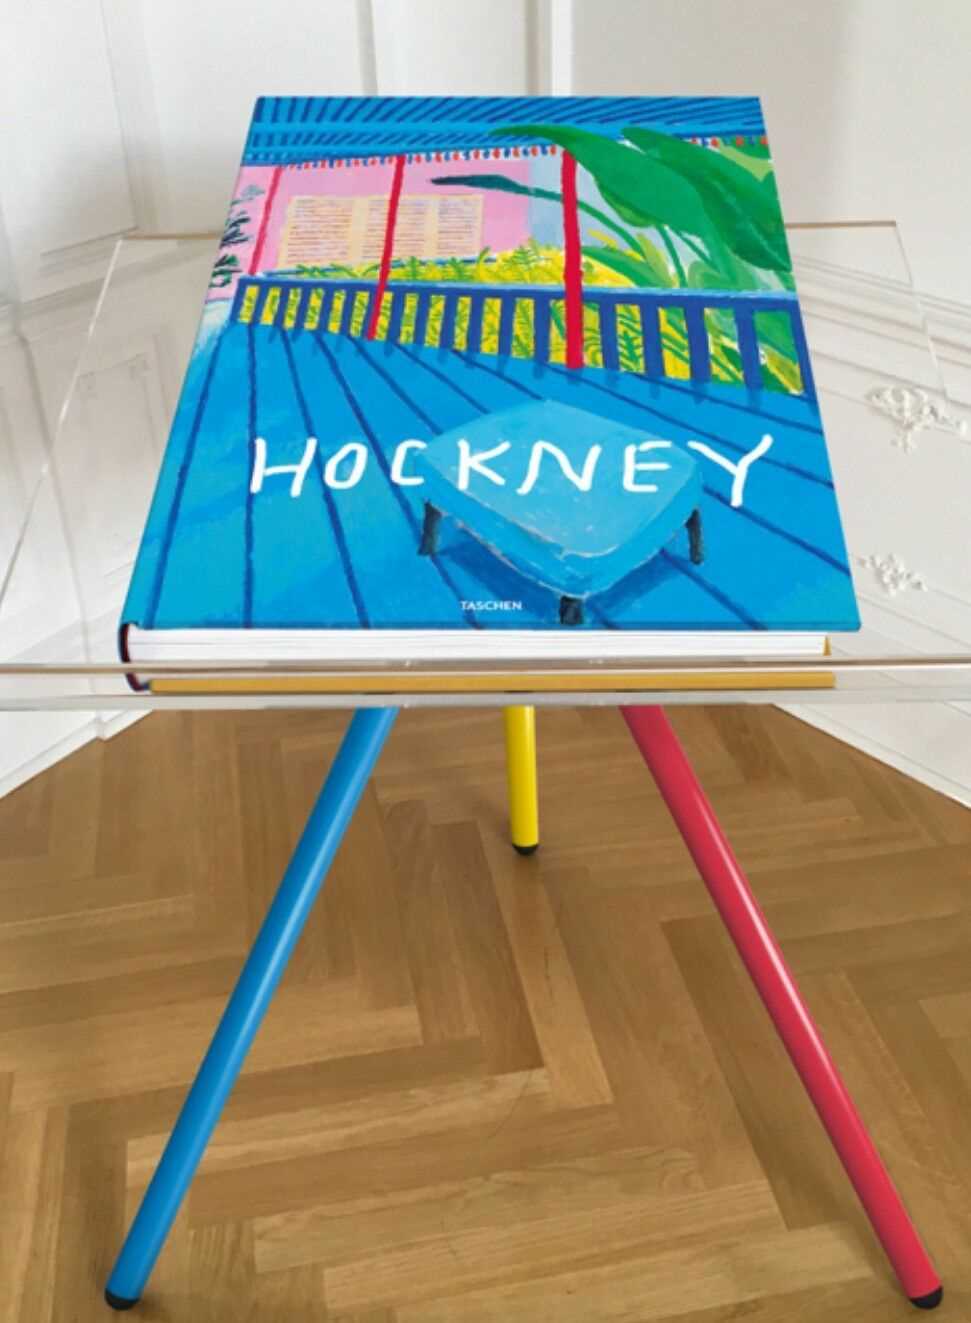 David HOCKNEY (1937)'A Bigger Book' Copy number 1719 from an edition of 10,000, signed, together